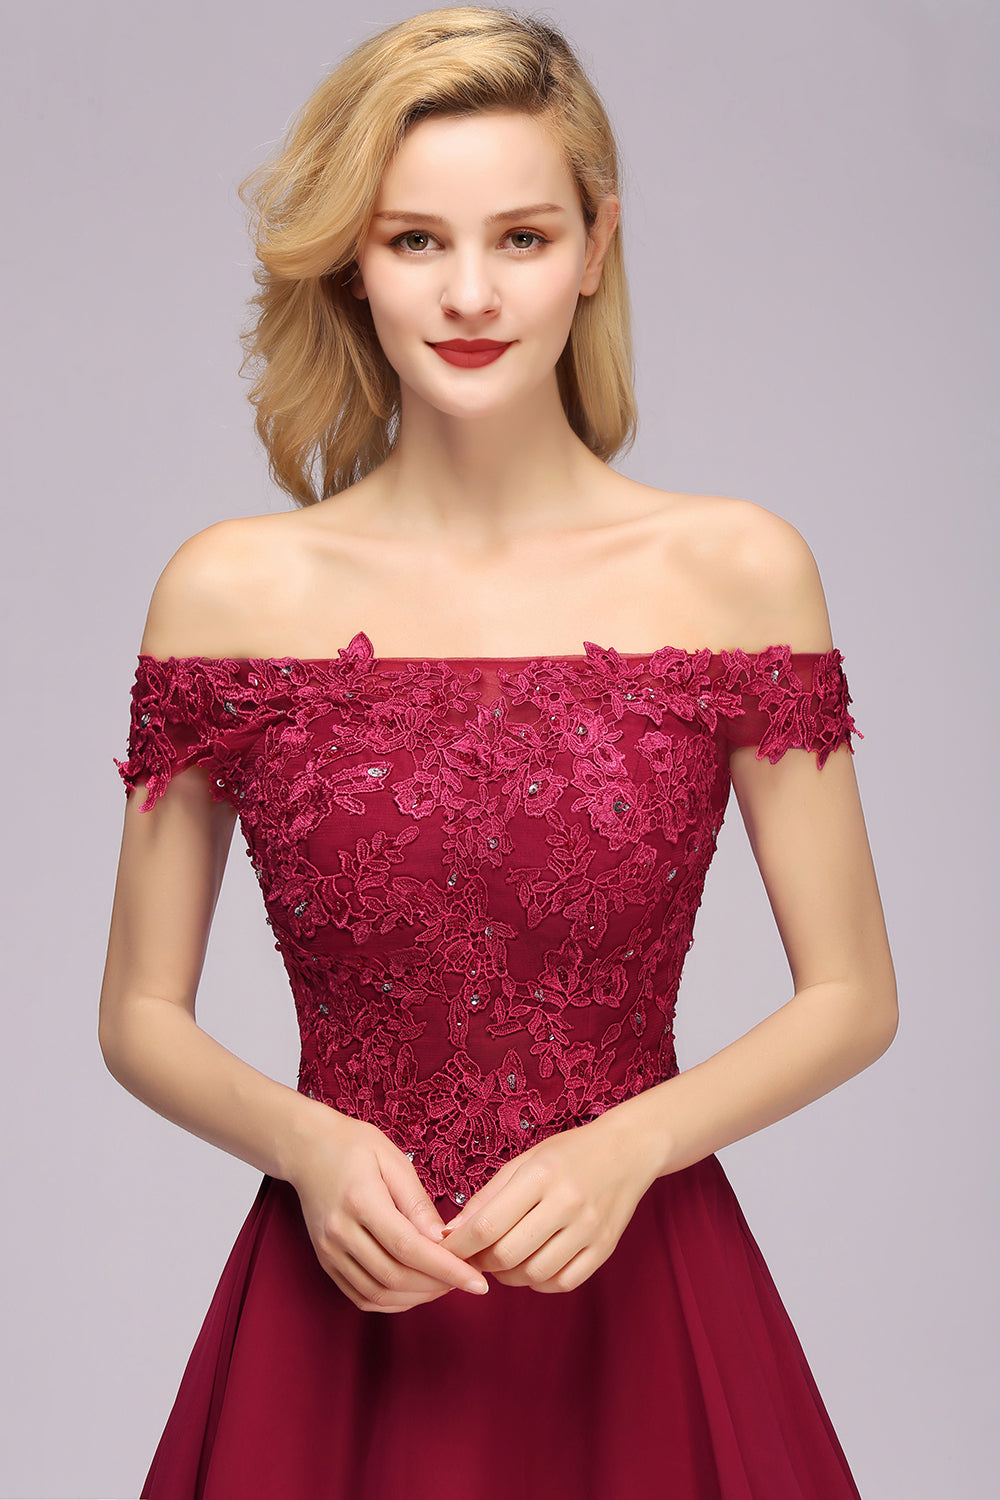 Load image into Gallery viewer, Elegant Short Lace Off-the-Shoulder Chiffon Bridesmaid Dress-BIZTUNNEL
